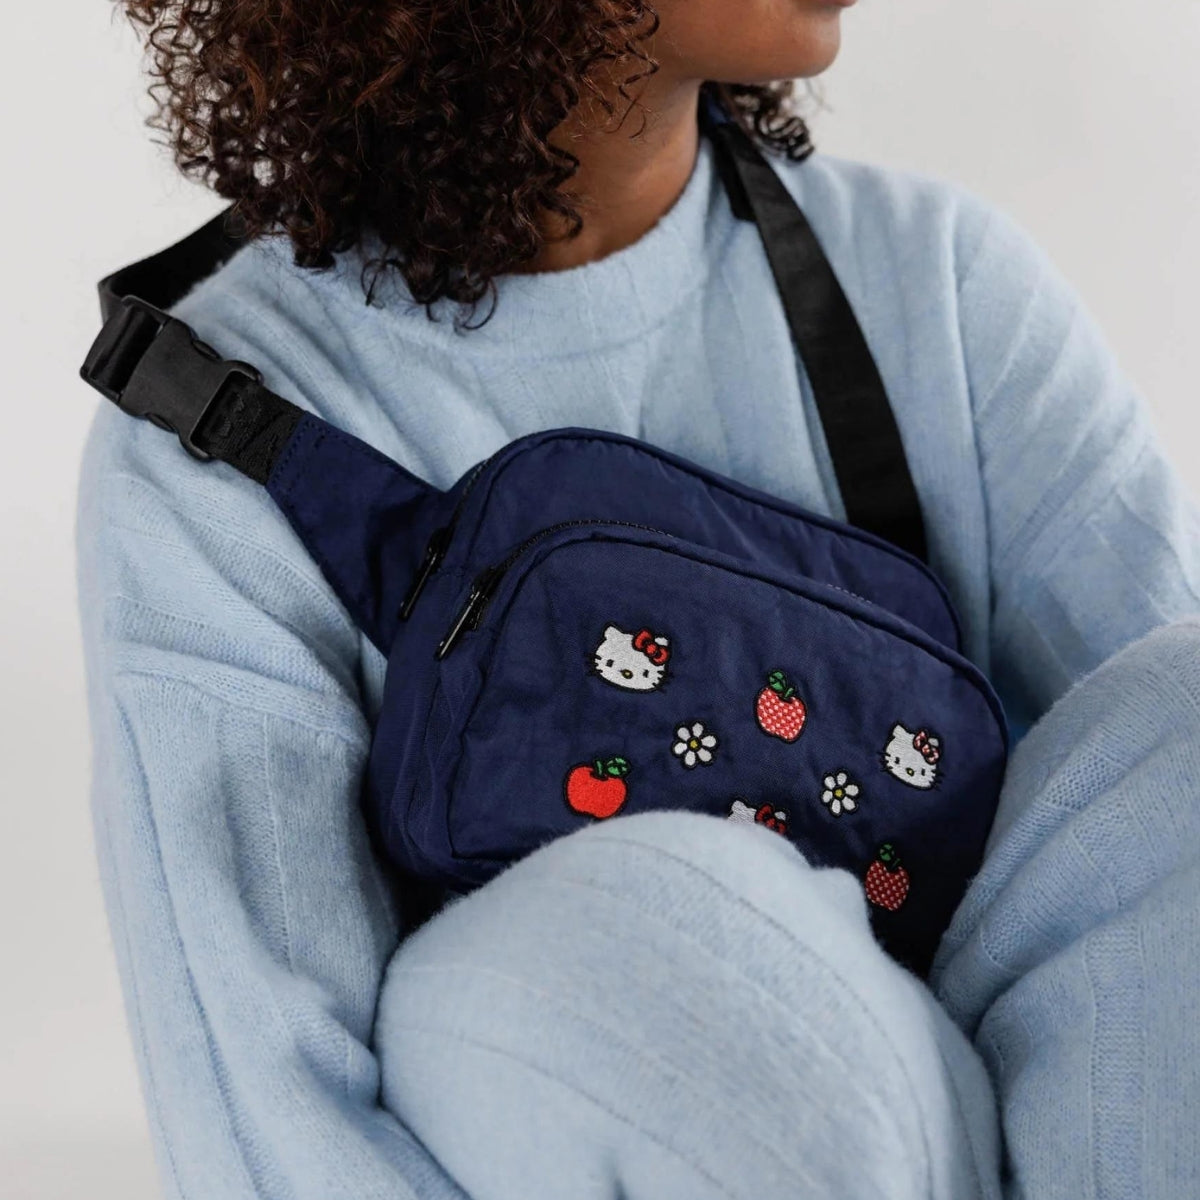 Baggu Fanny Pack in Embroidered Hello Kitty